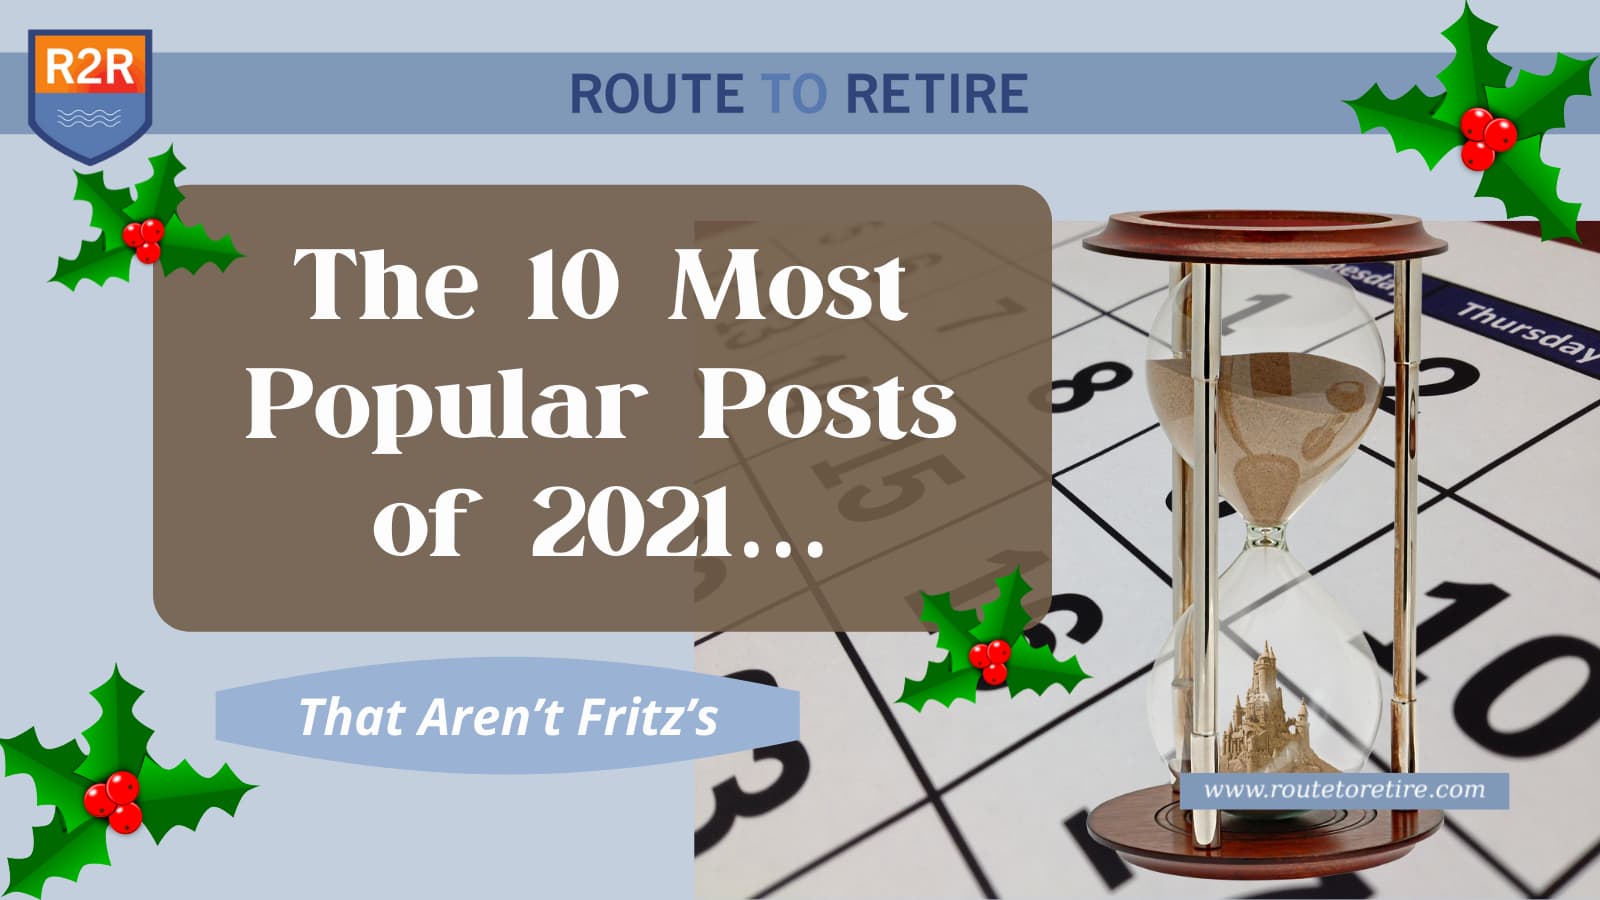 The 10 Most Popular Posts of 2021… That Aren’t Fritz’s